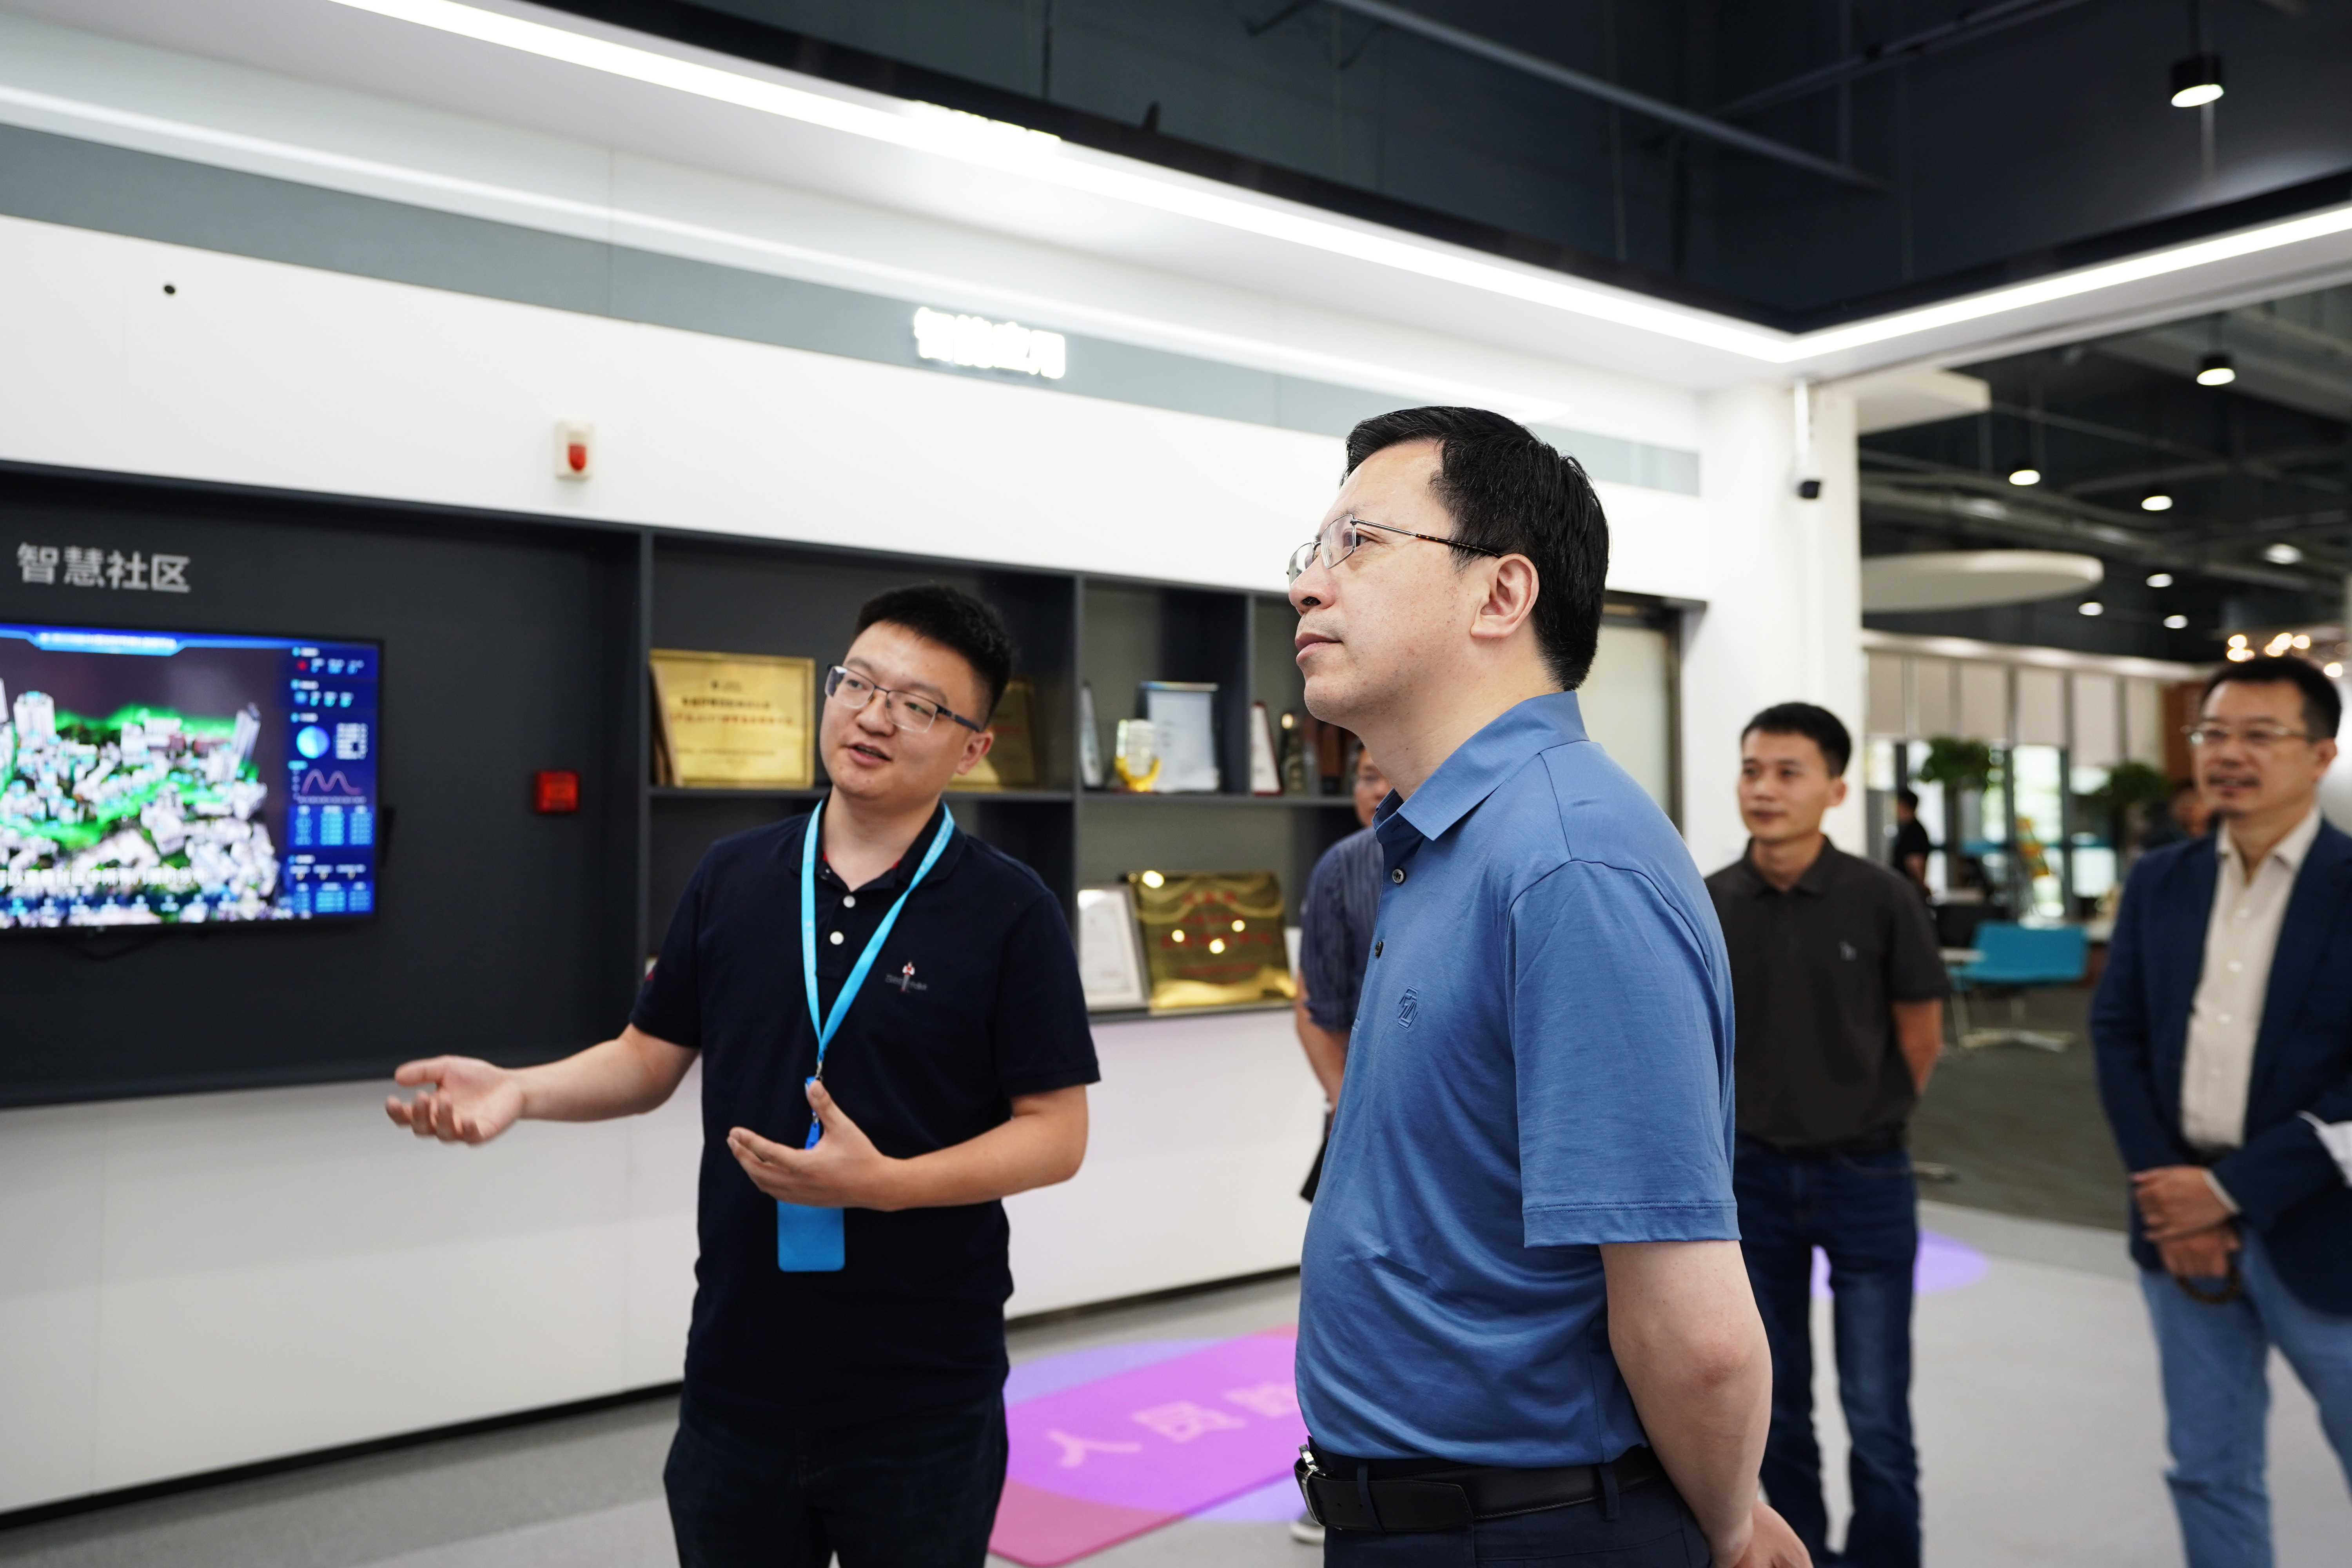 Ye Jianqiang, member of the Standing Committee of Mount Huangshan Municipal Committee of the CPC, and his delegation visited Minivision Technology to discuss the intelligent construction of the scenic spot